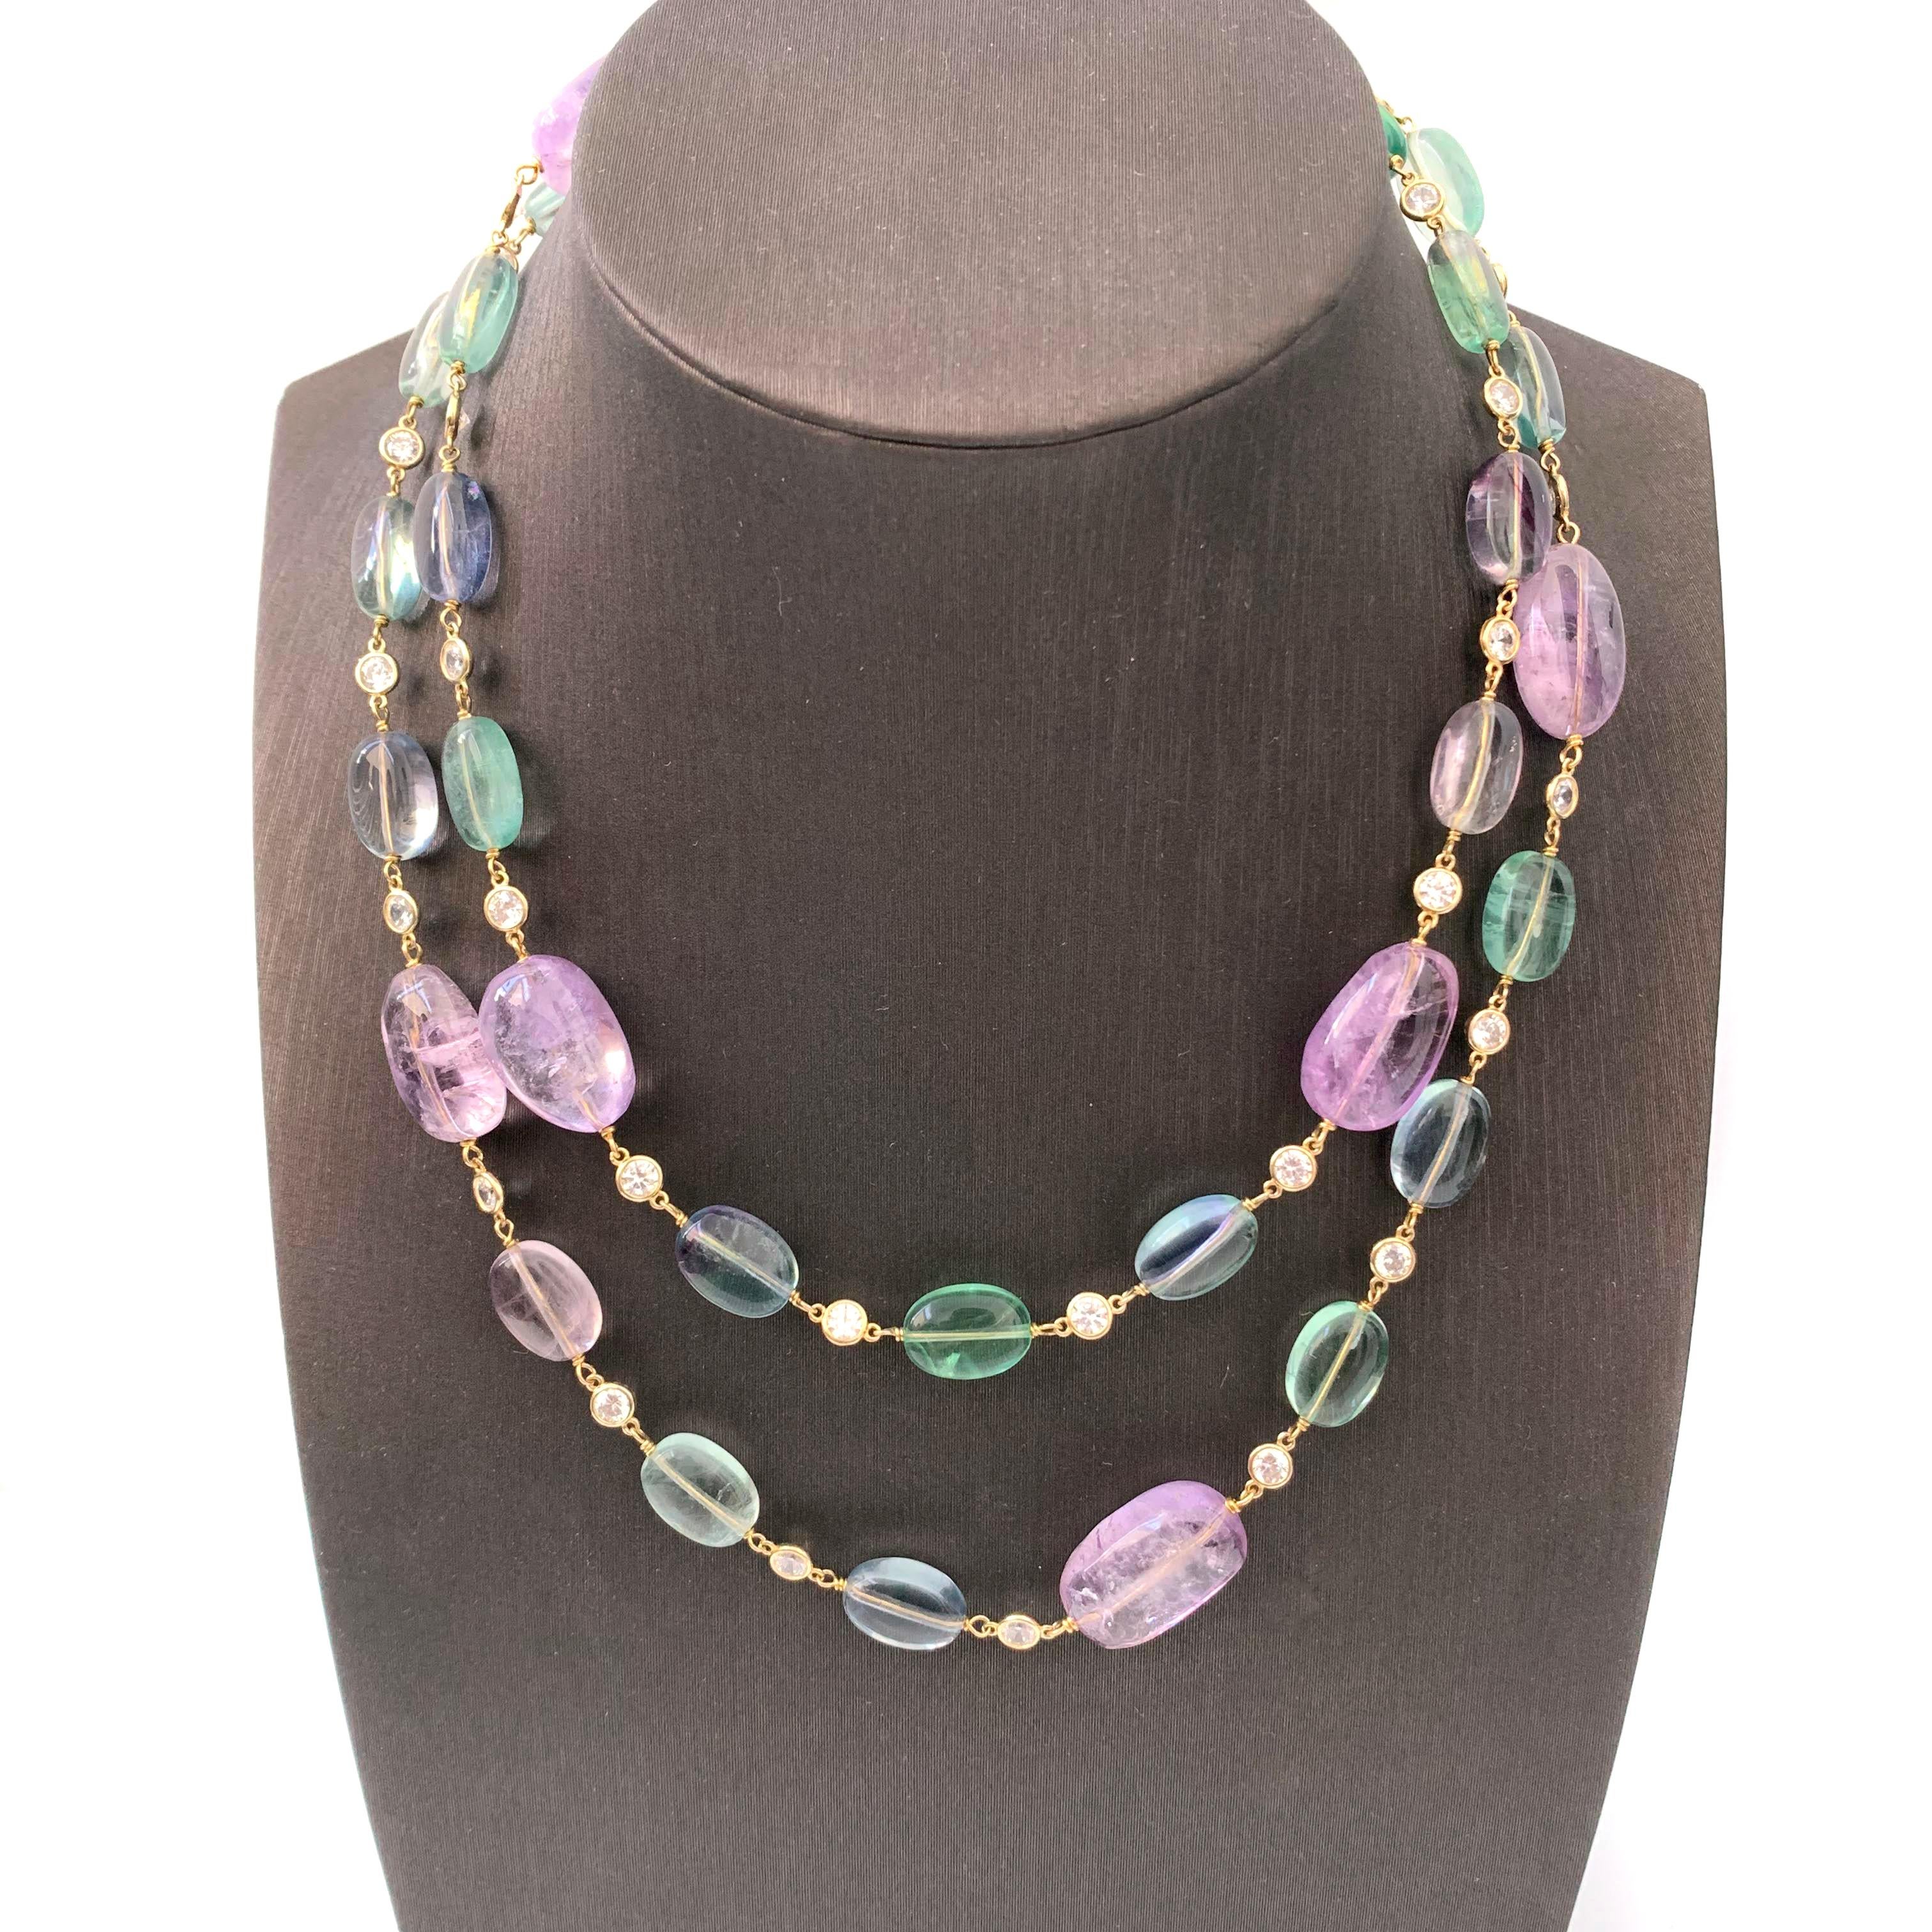 Discover the beautiful tumbled Fluorite and Amethyst station necklace.

This necklace feature 27 pcs of beautiful tumbled multi-shaded fluorite and 6 pcs of large and shiny amethyst. Each station is hand wire wrapped with 14k vermeil gold plated